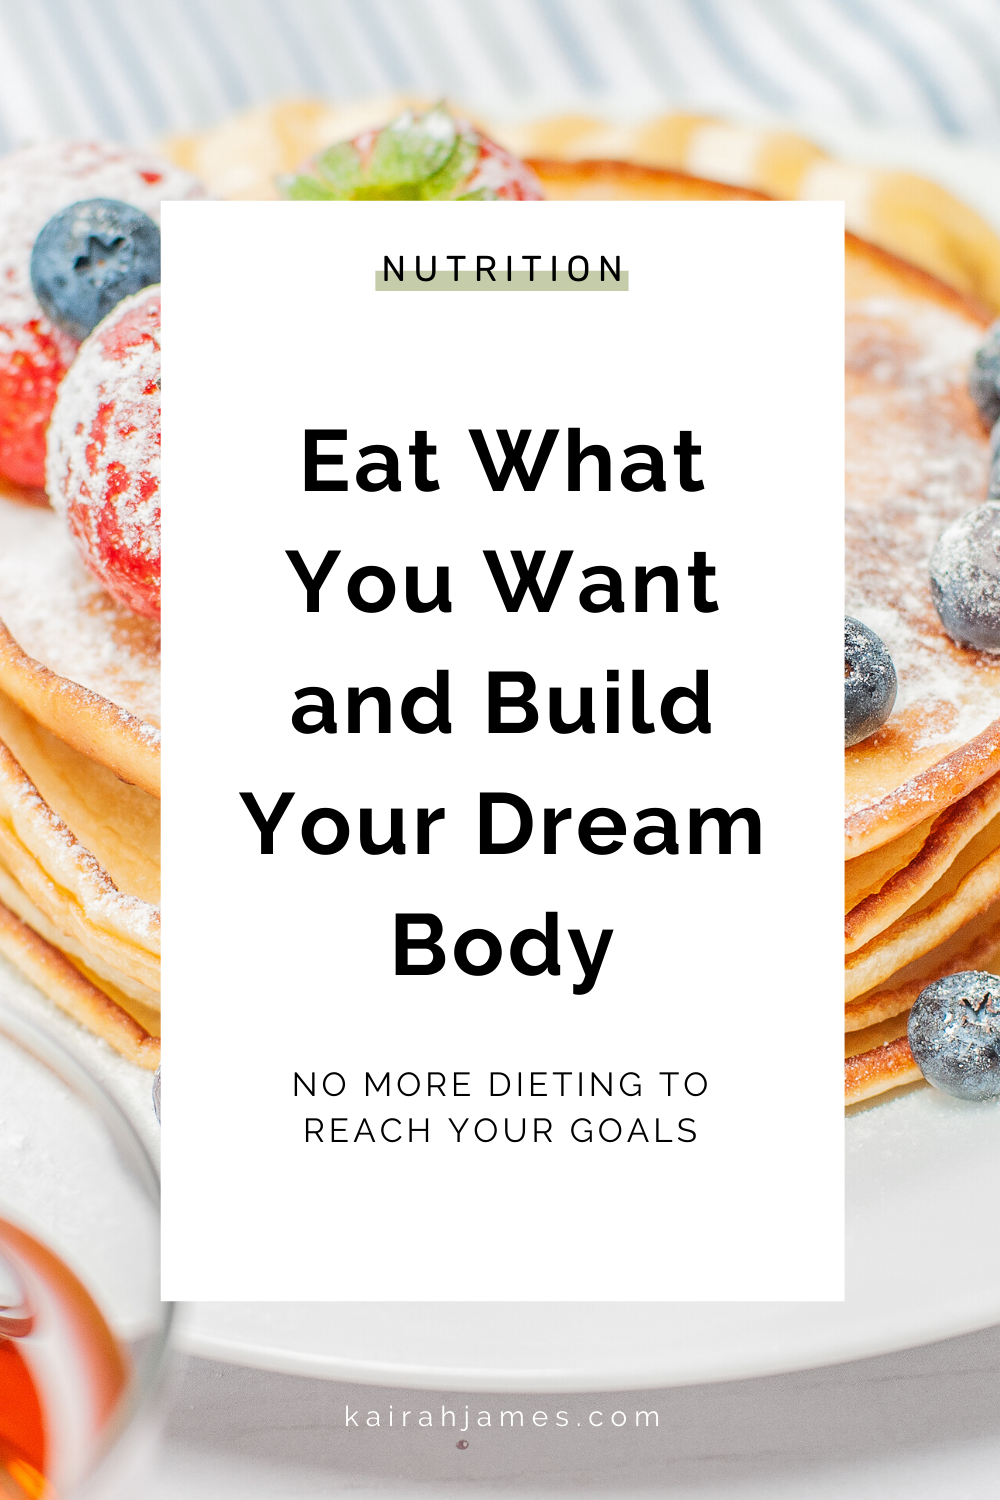 Learn how to eat what you want and build your dream body. No more dieting to reach your goals! Read the full post here and download your FREE copy of the nutrition guide here:  https://www.kairahjames.com/blog/eat-what-you-want